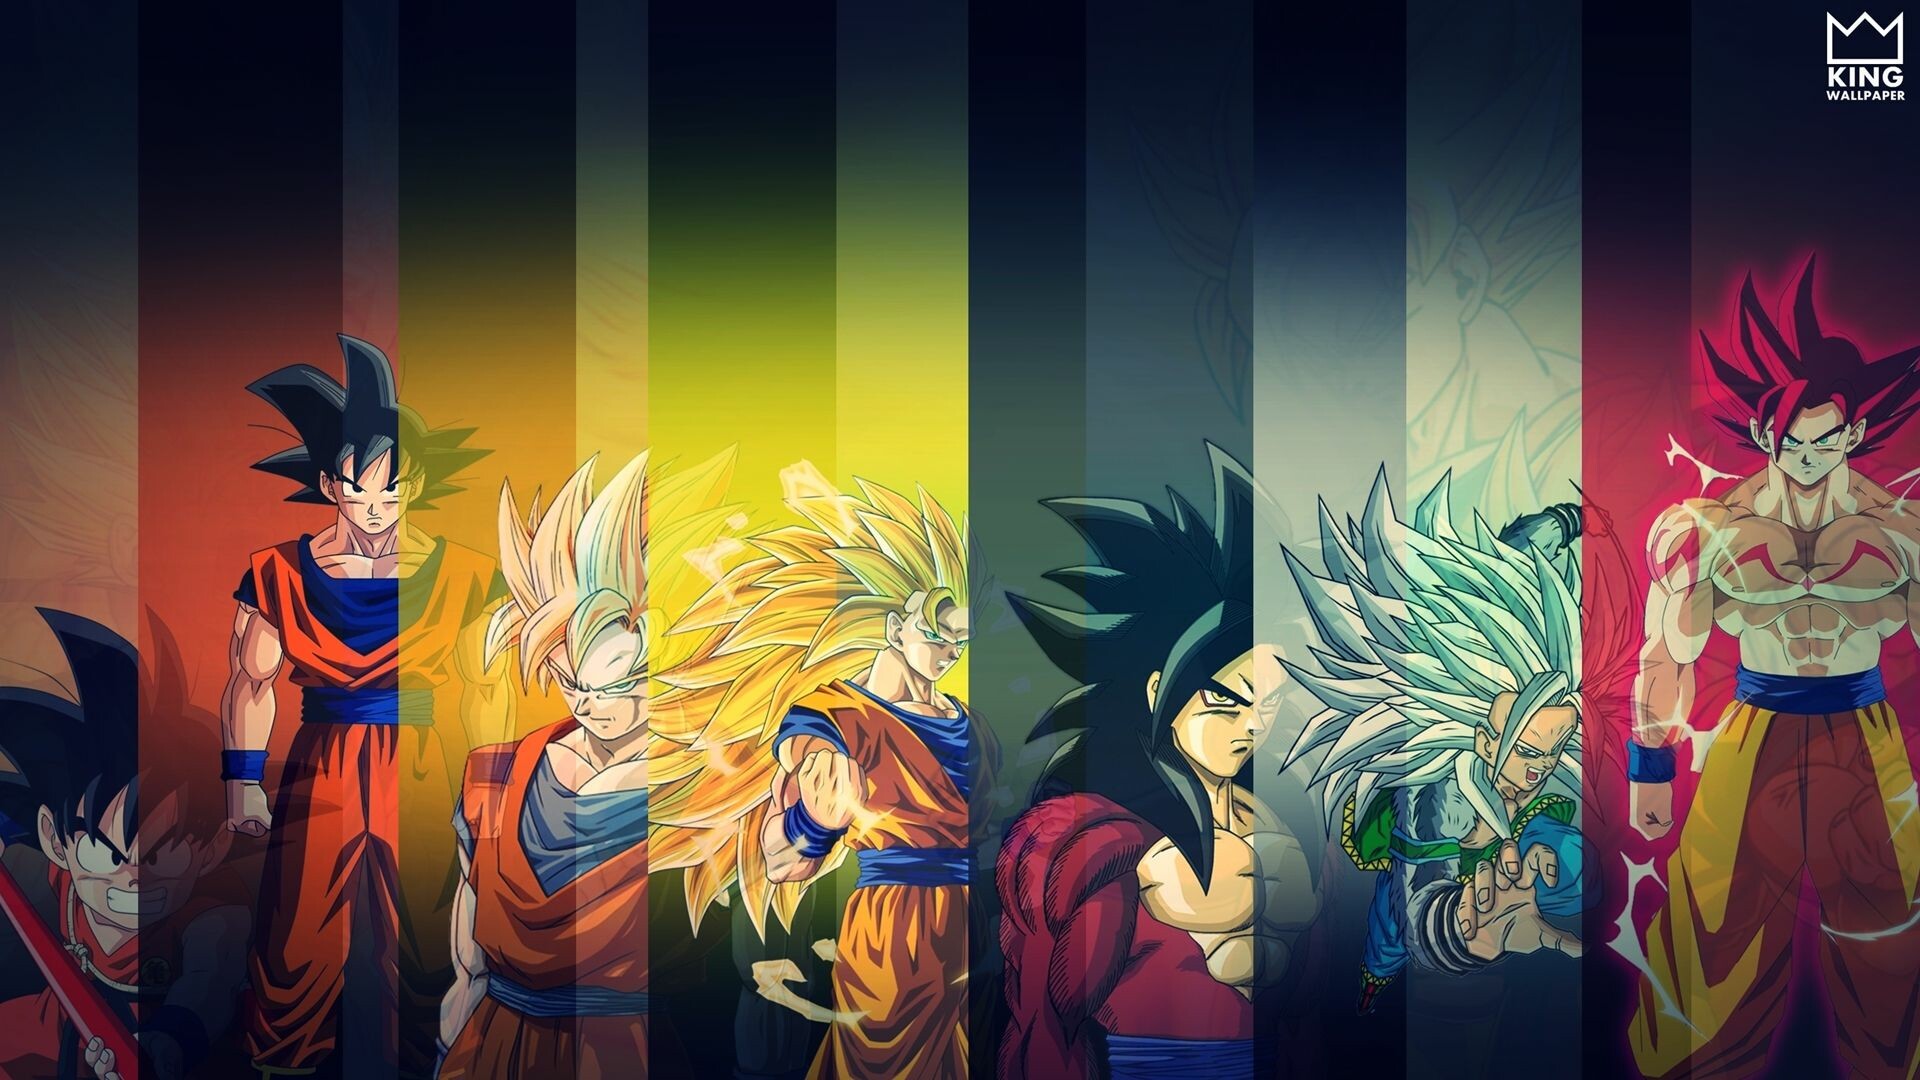 56+ Dragon Ball Goku Wallpapers: HD, 4K, 5K for PC and Mobile | Download  free images for iPhone, Android